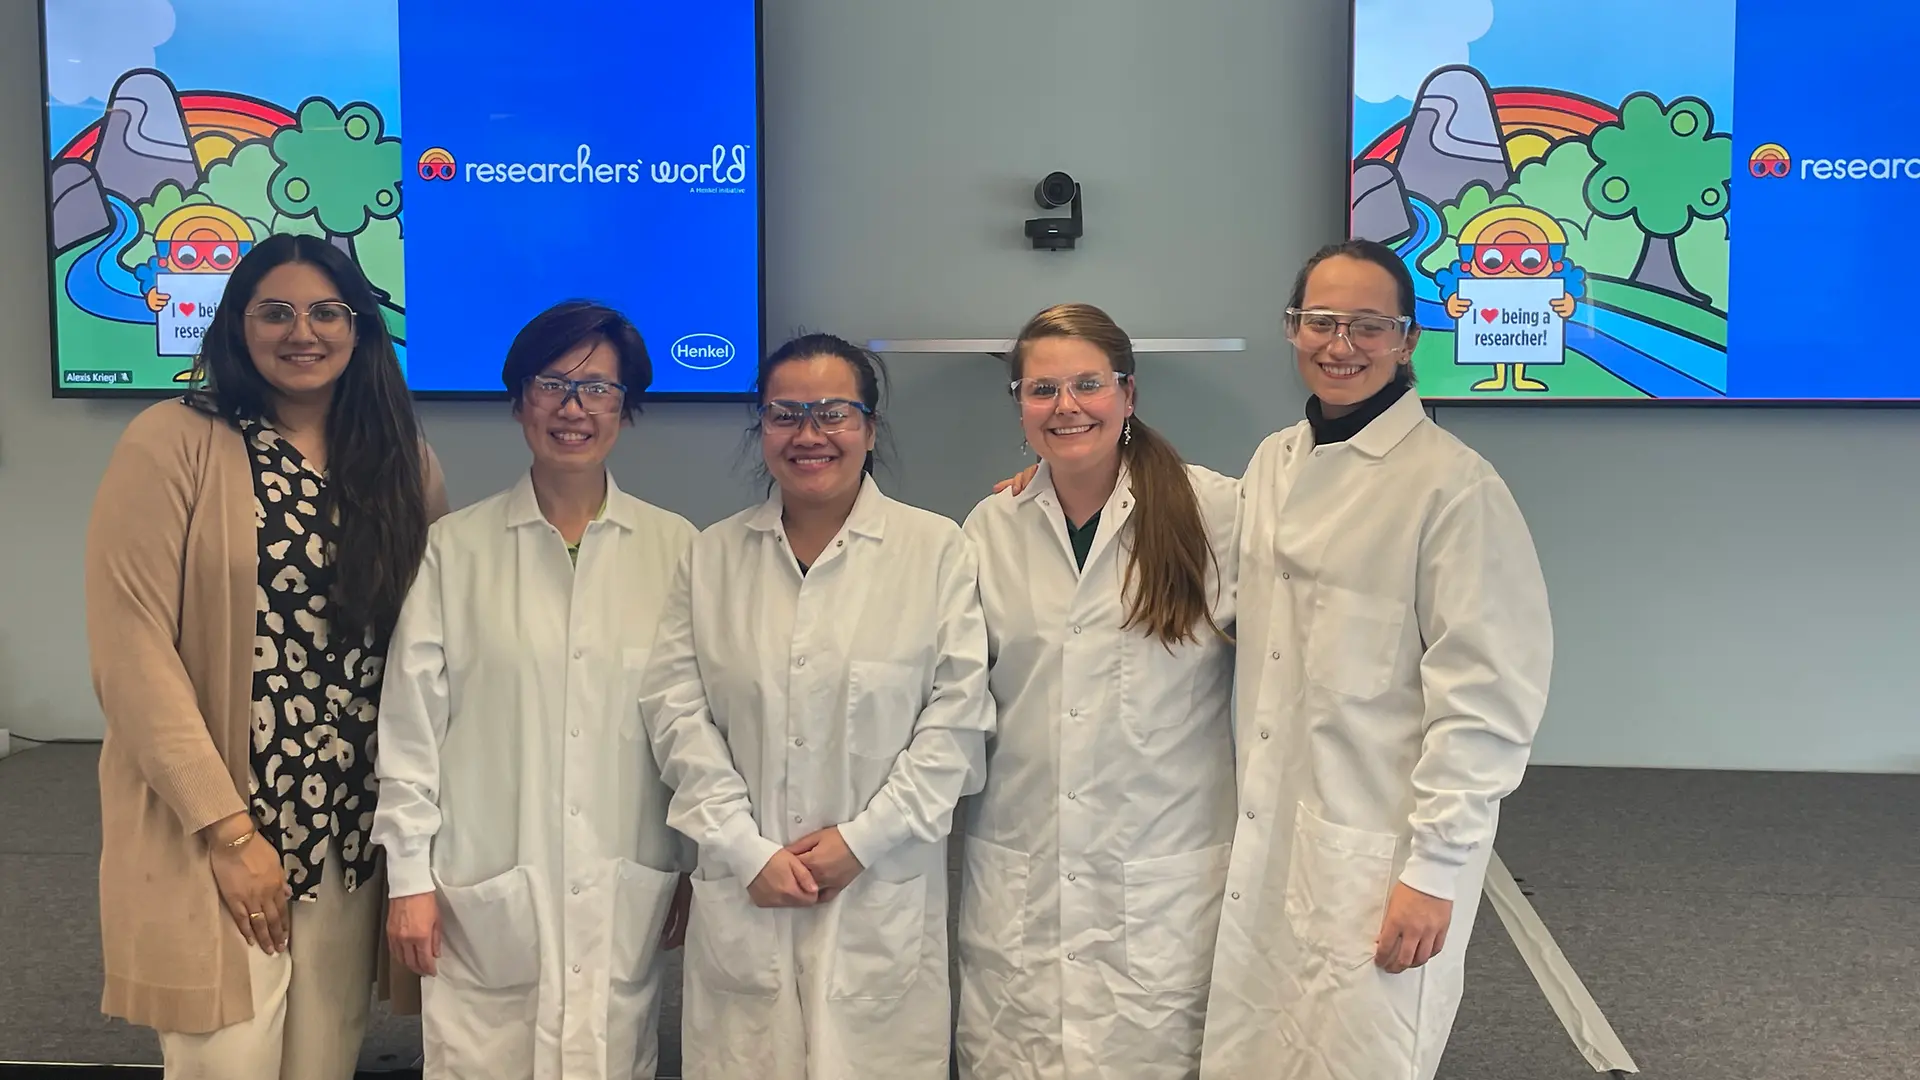 Principal Scientist Alice Cheung and Product Optimization Manager Alexis Kriegl are Inspiring Future Pioneers through STEM Education